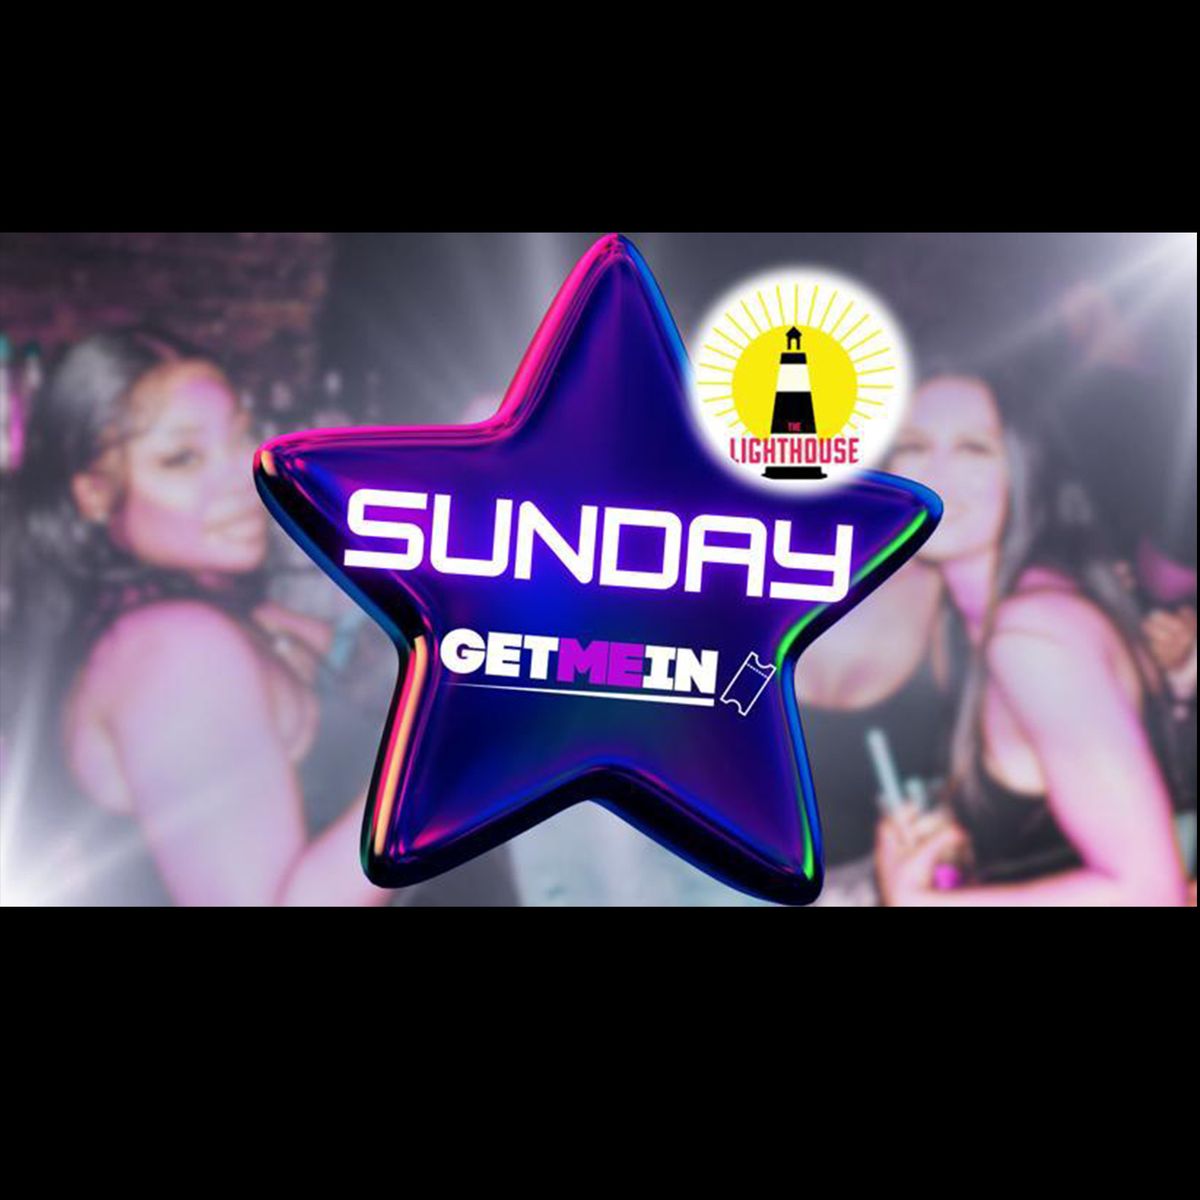 Shoreditch Afrobeats & Bashment Party \/\/ The Lighthouse Shoreditch \/\/ Every Sunday \/\/ Get Me In!